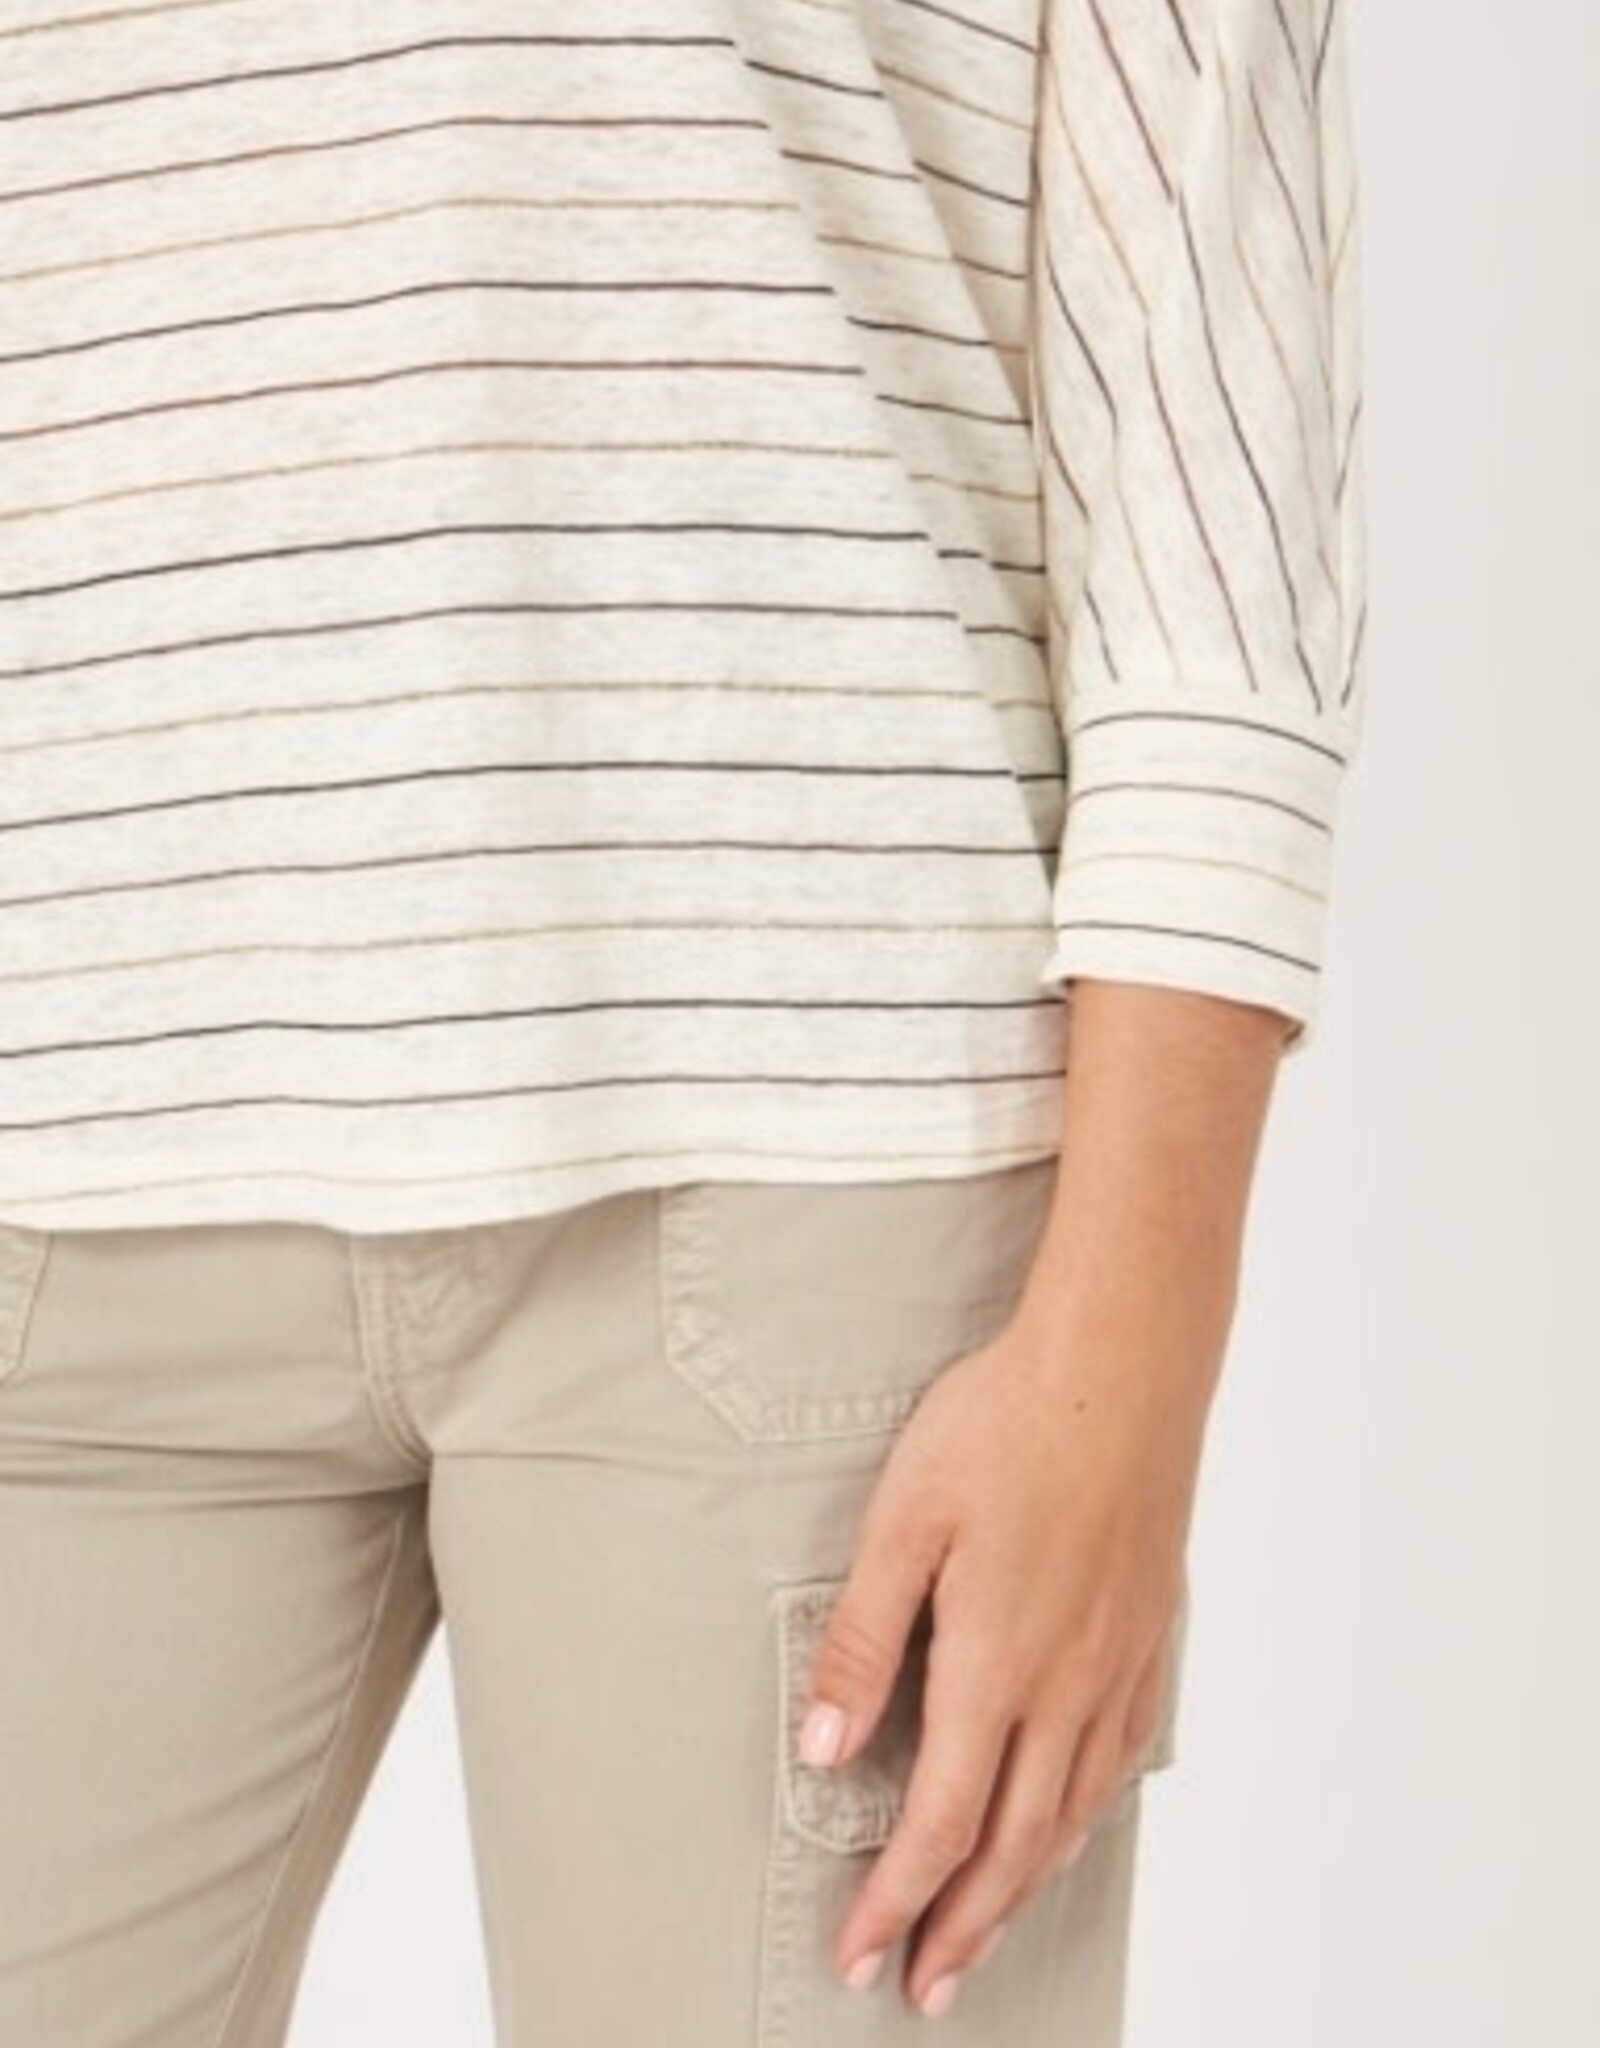 REPEAT CASHMERE 3/4 Sleeve Striped SHIRT